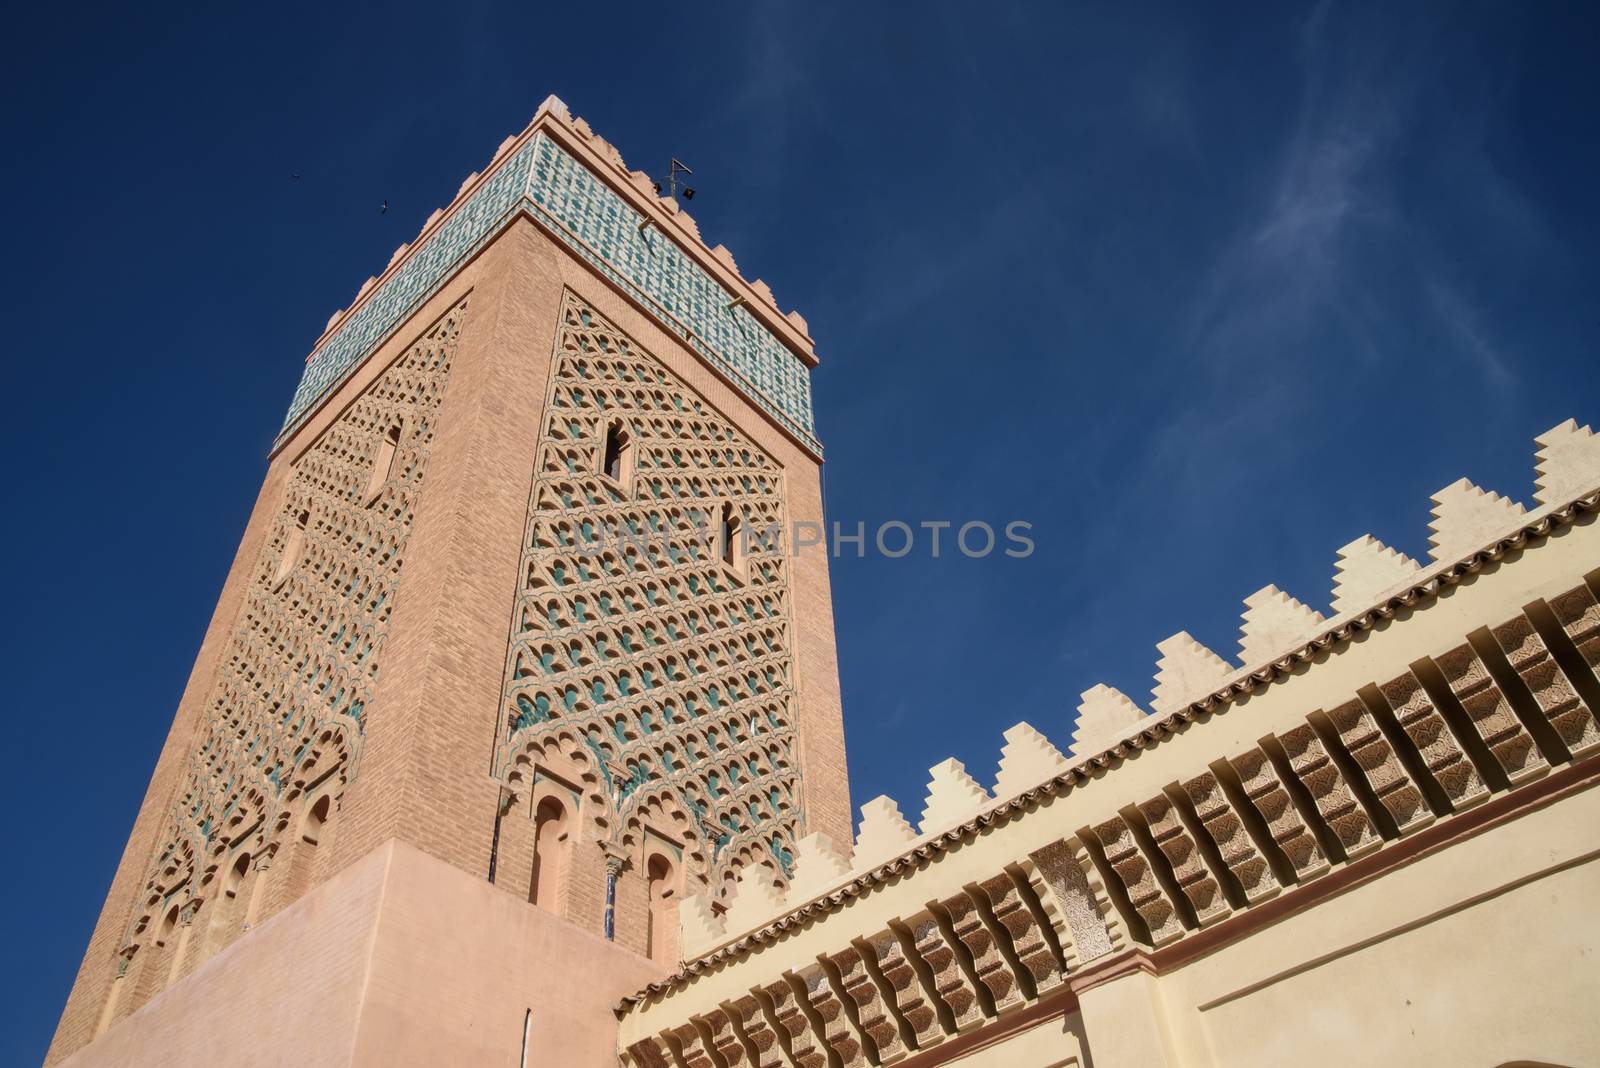 Mosque against the blue sky in Marrakesh, Morocco